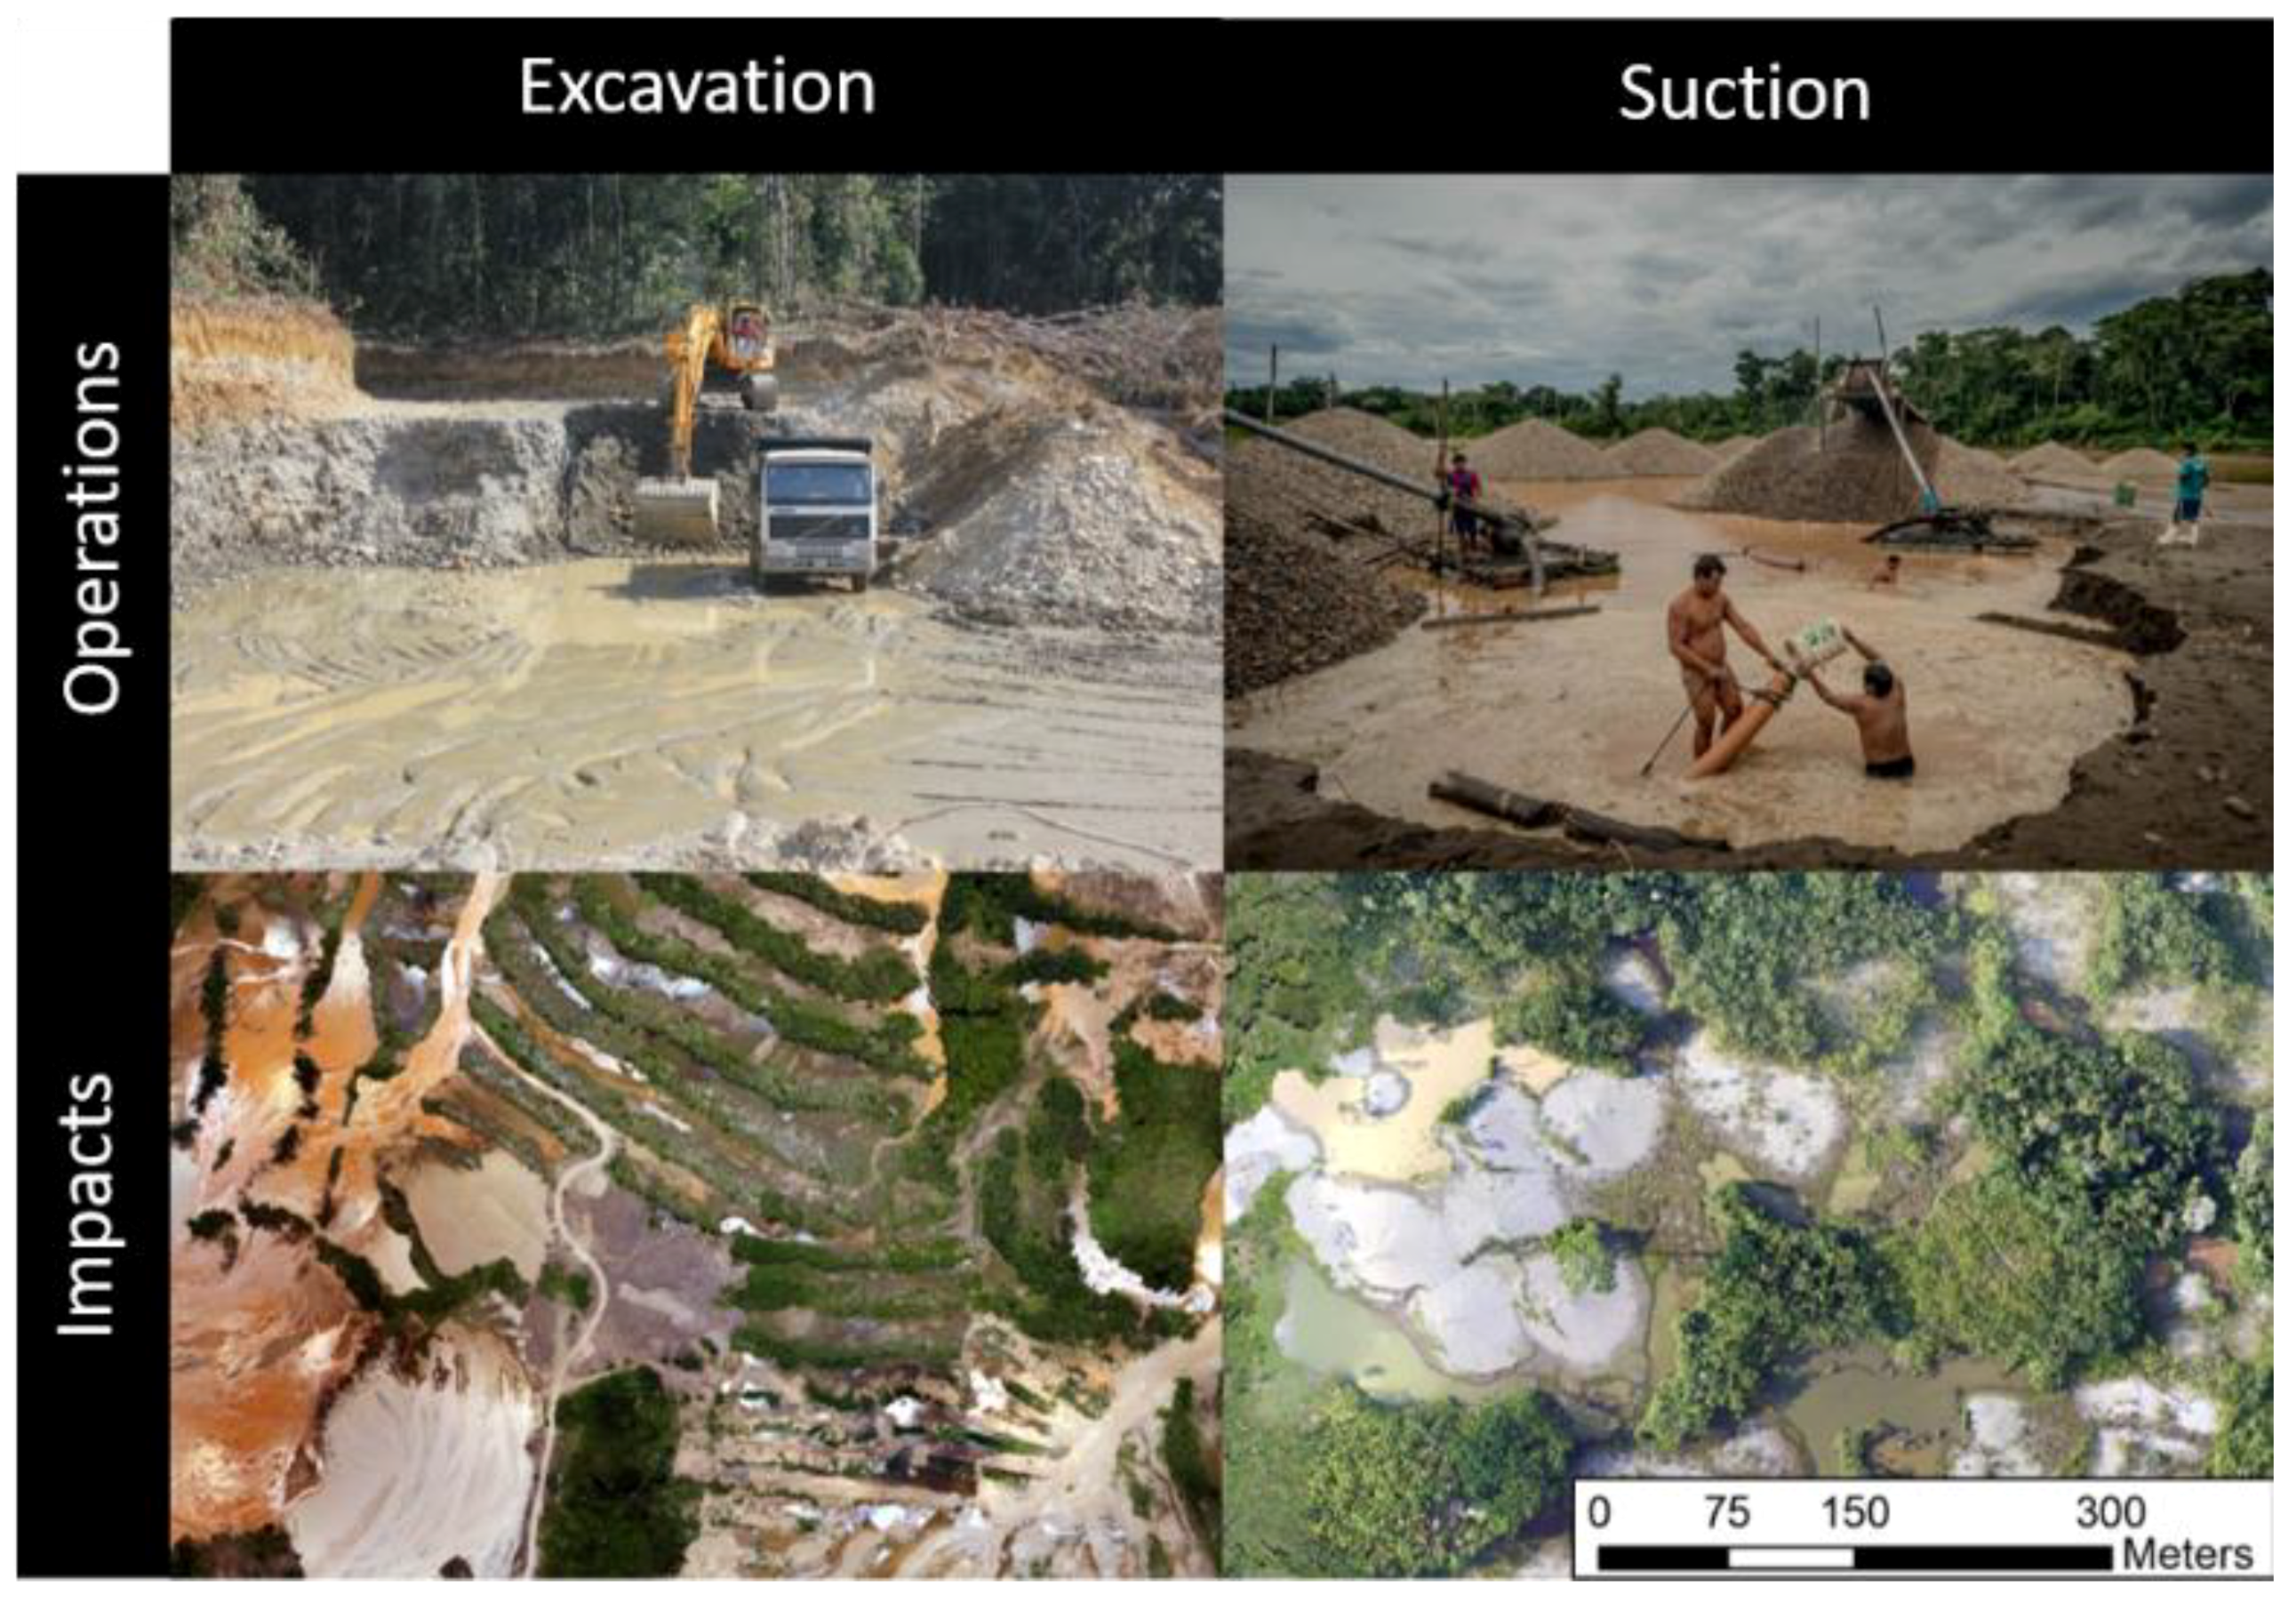 Illegal gold mining booms in Brazilian , harming environment